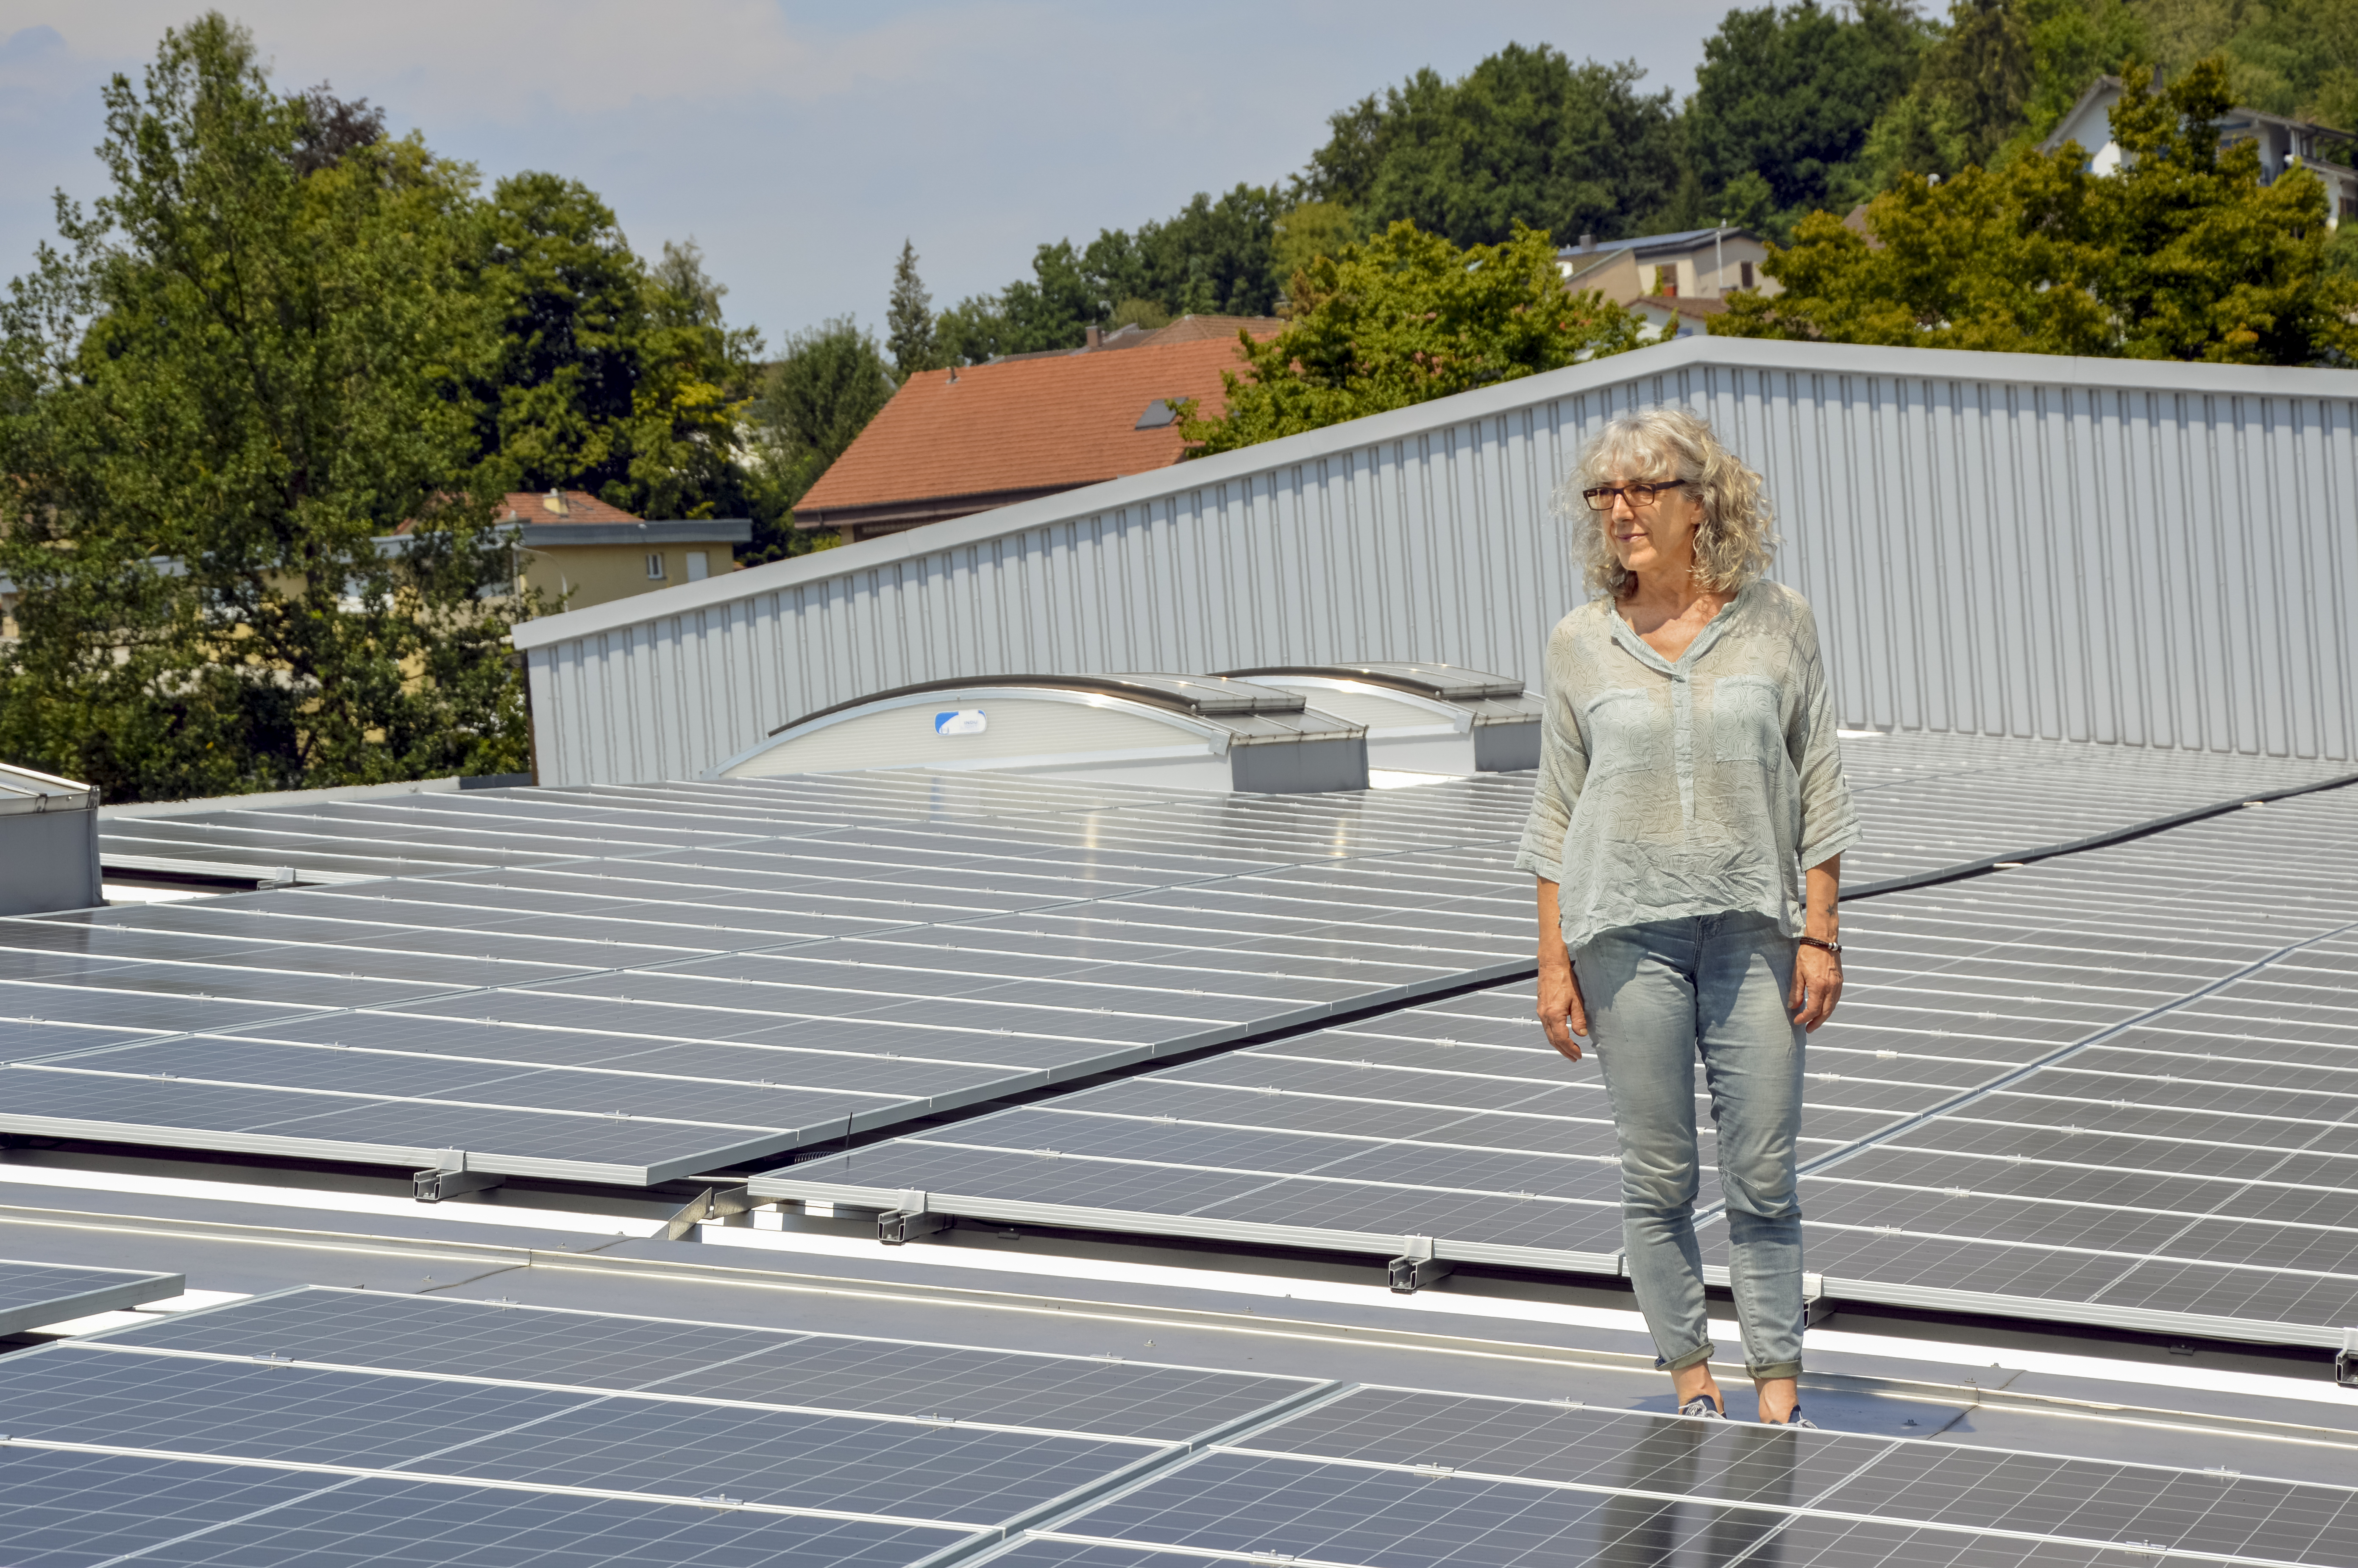 Saka Immobilien AG PV Contracting